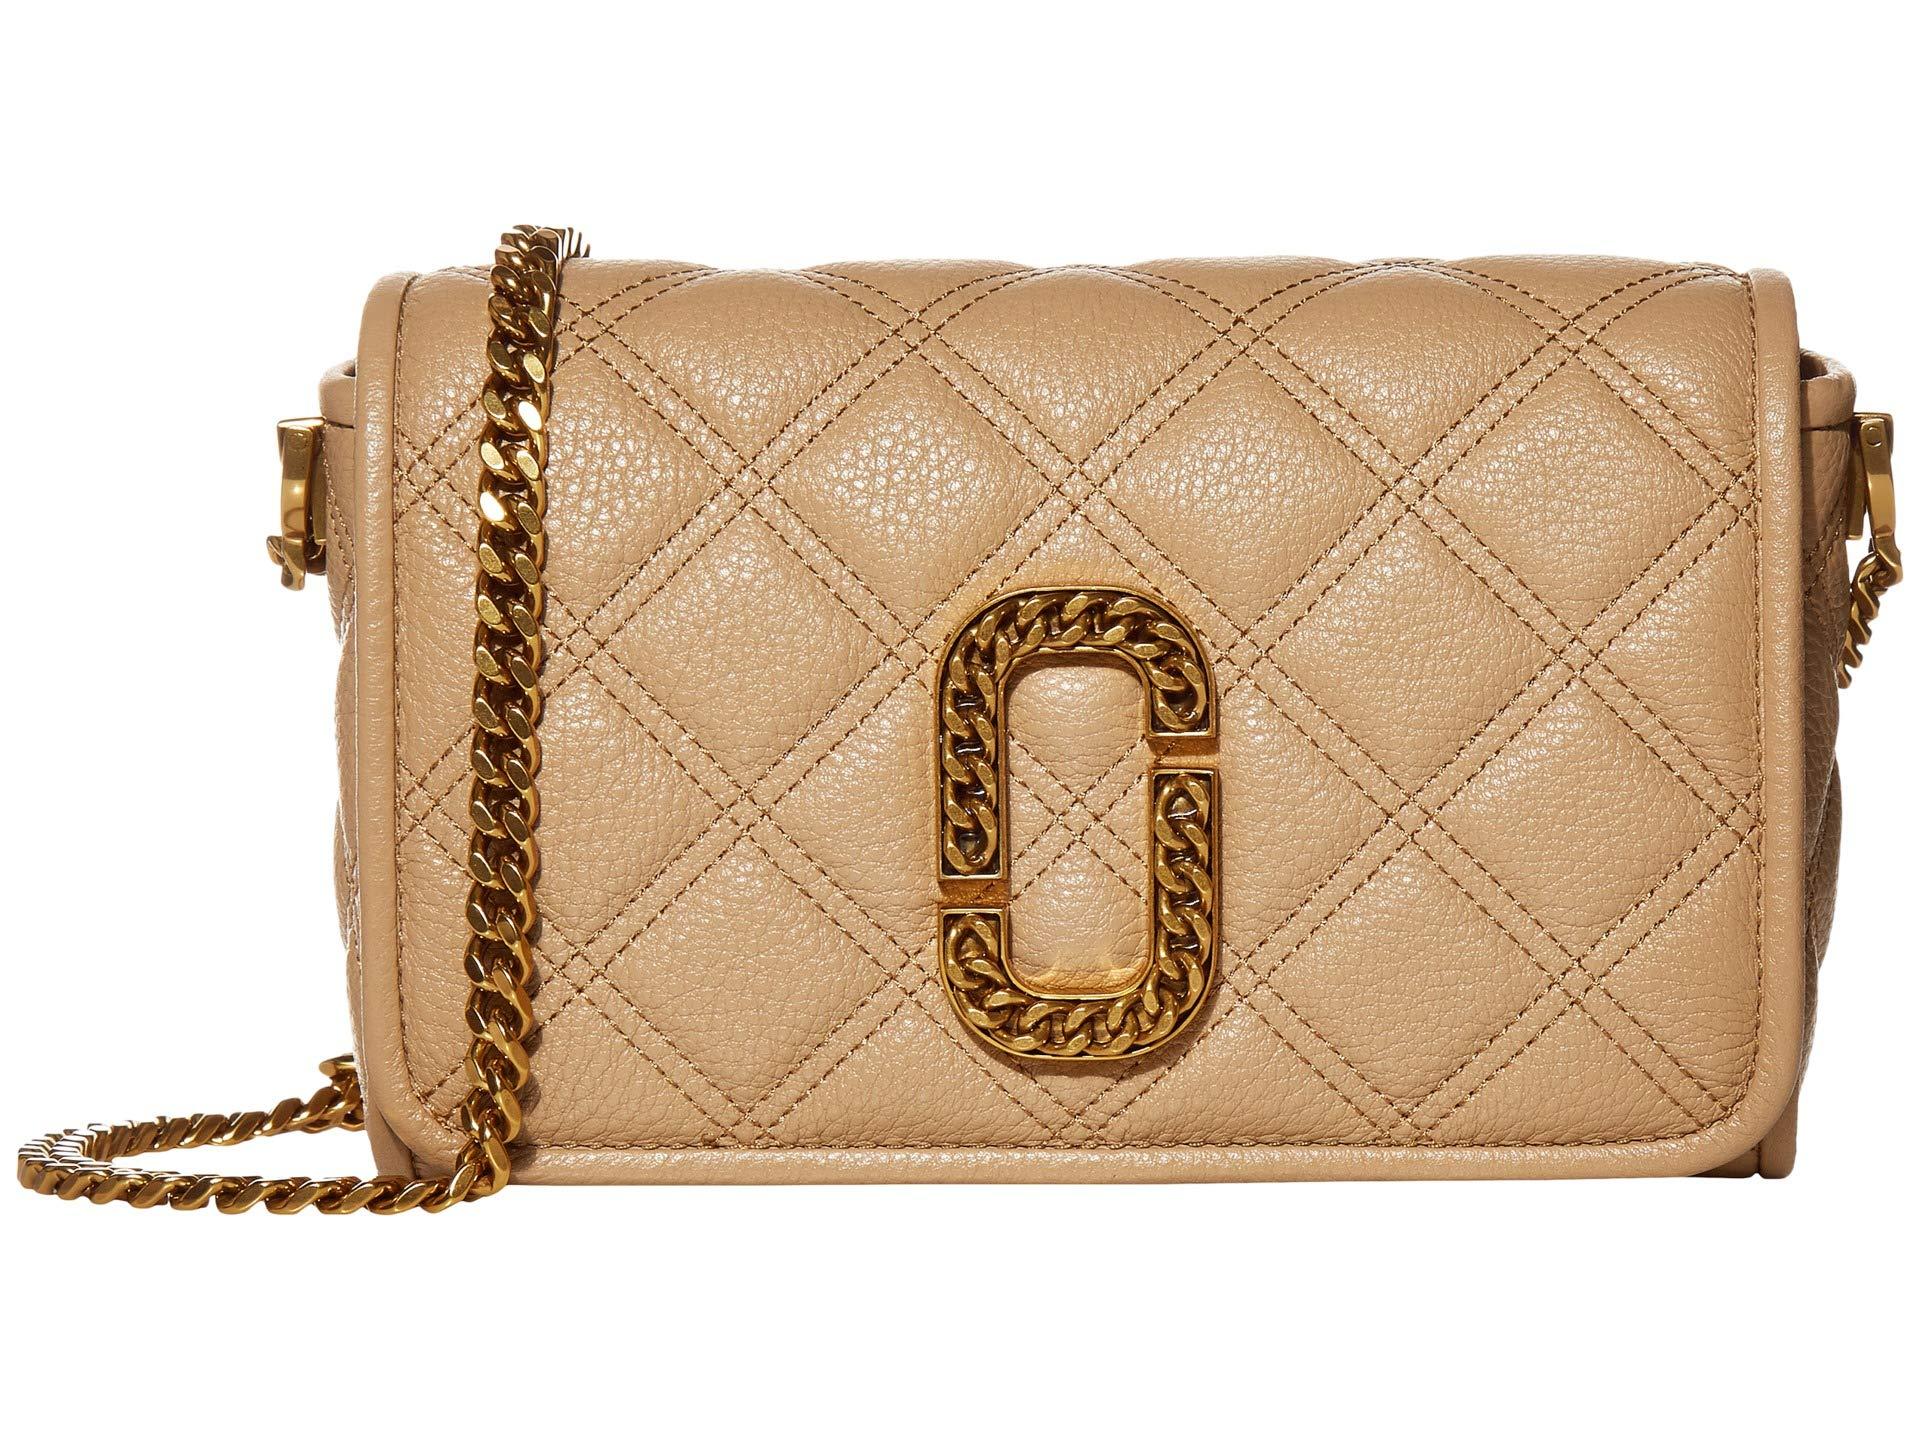 Marc Jacobs The Status Flap Bag in Natural